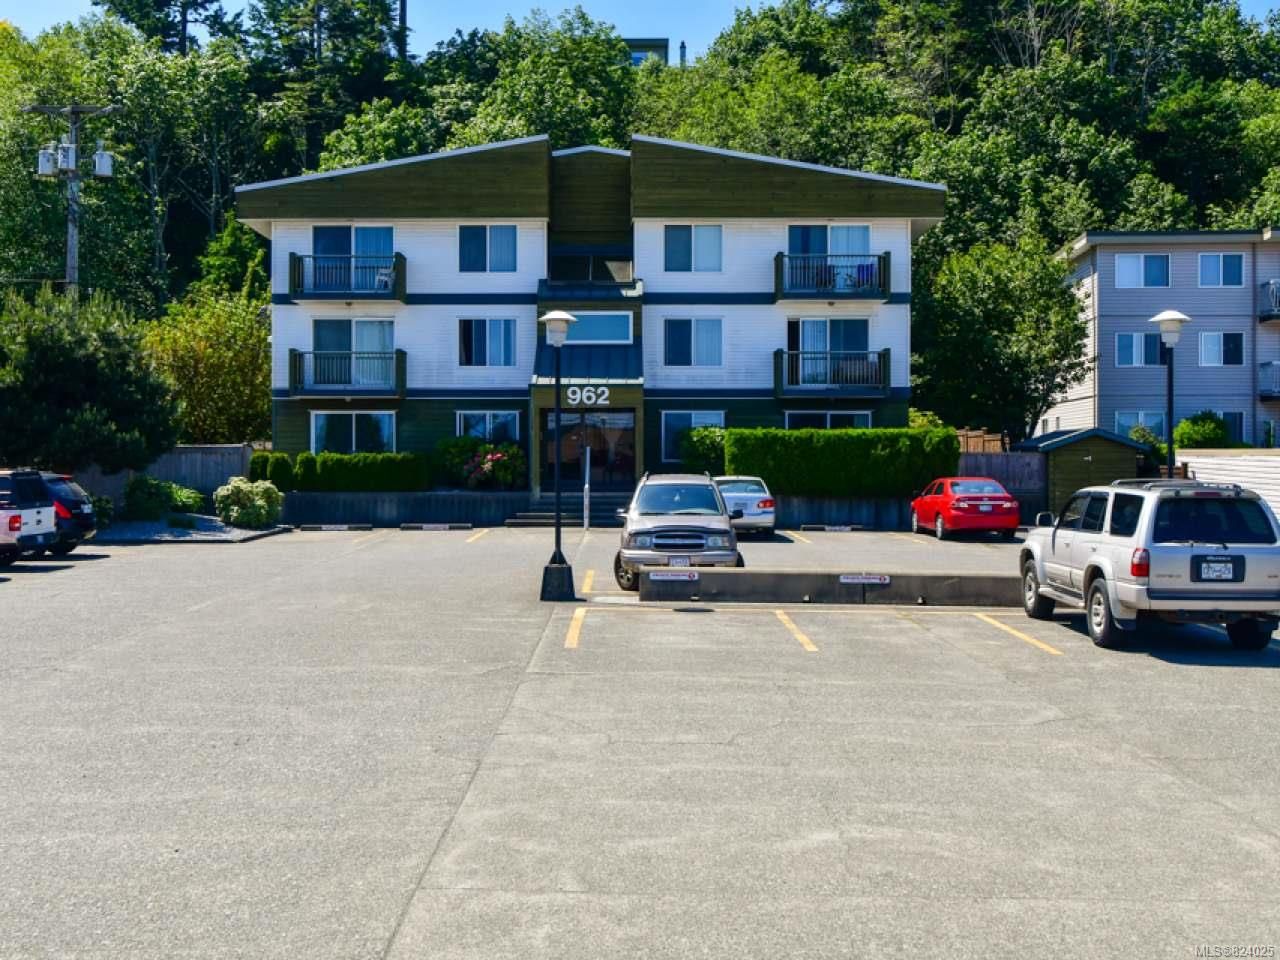 Main Photo: 306 962 S ISLAND S Highway in CAMPBELL RIVER: CR Campbell River South Condo for sale (Campbell River)  : MLS®# 824025